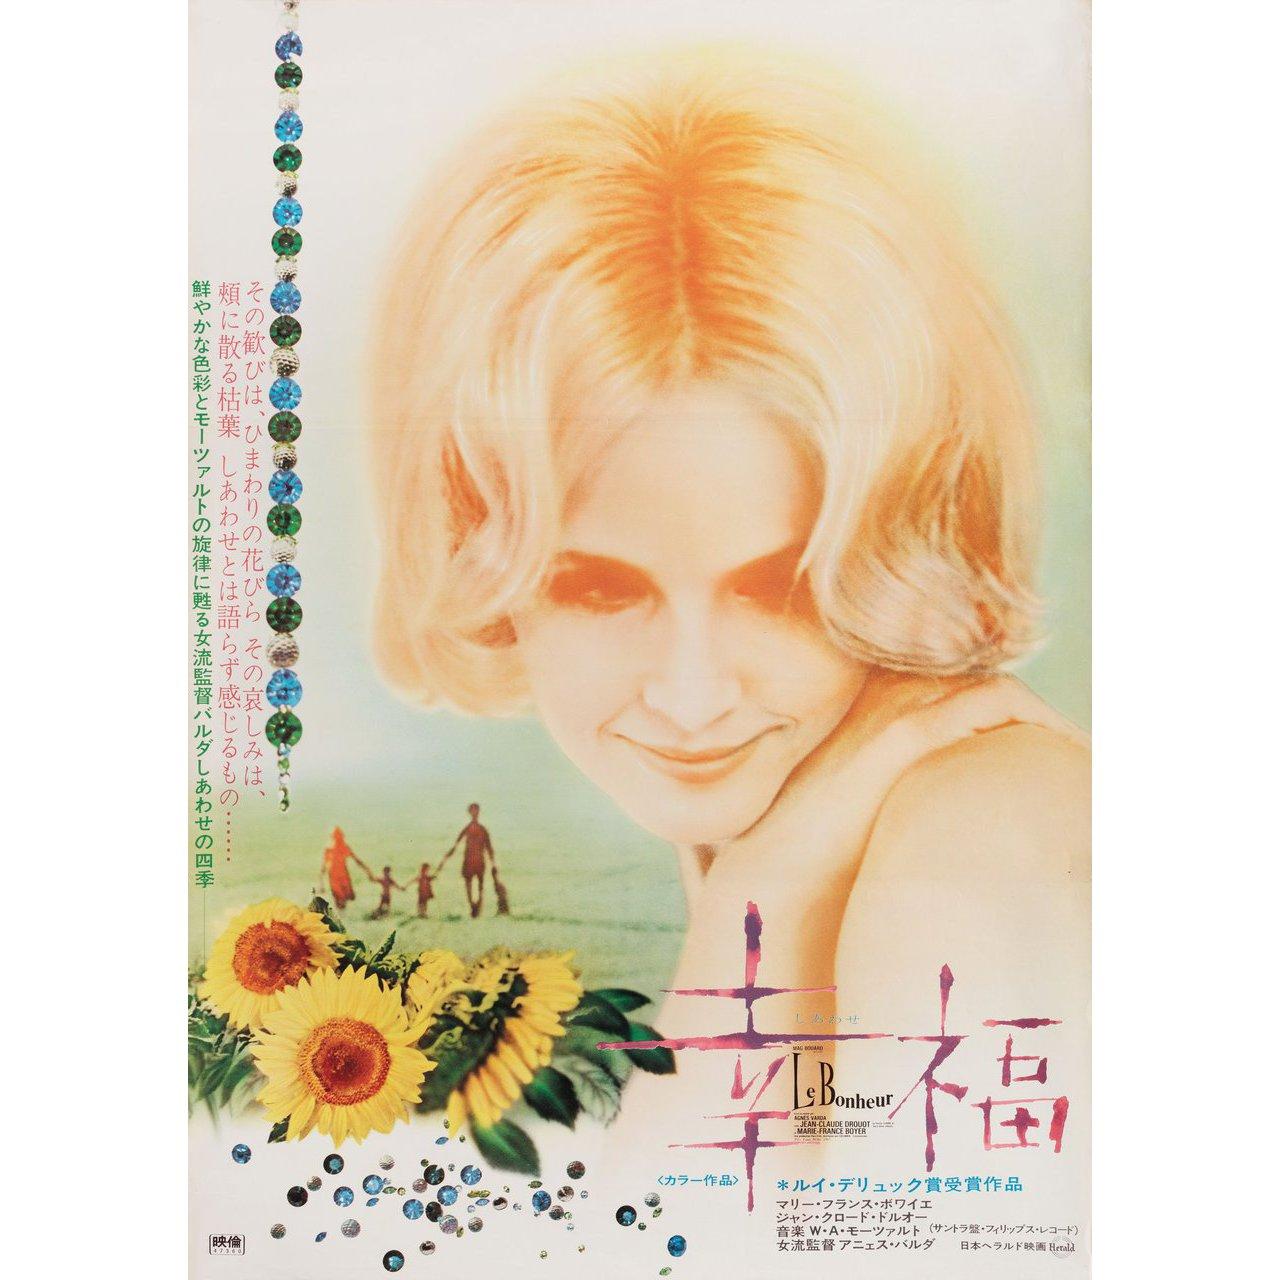 Original 1972 re-release Japanese B2 poster for the 1965 film Le Bonheur (Happiness) directed by Agnes Varda with Jean-Claude Drouot / Claire Drouot / Olivier Drouot / Sandrine Drouot. Very Good-Fine condition, rolled. Please note: the size is